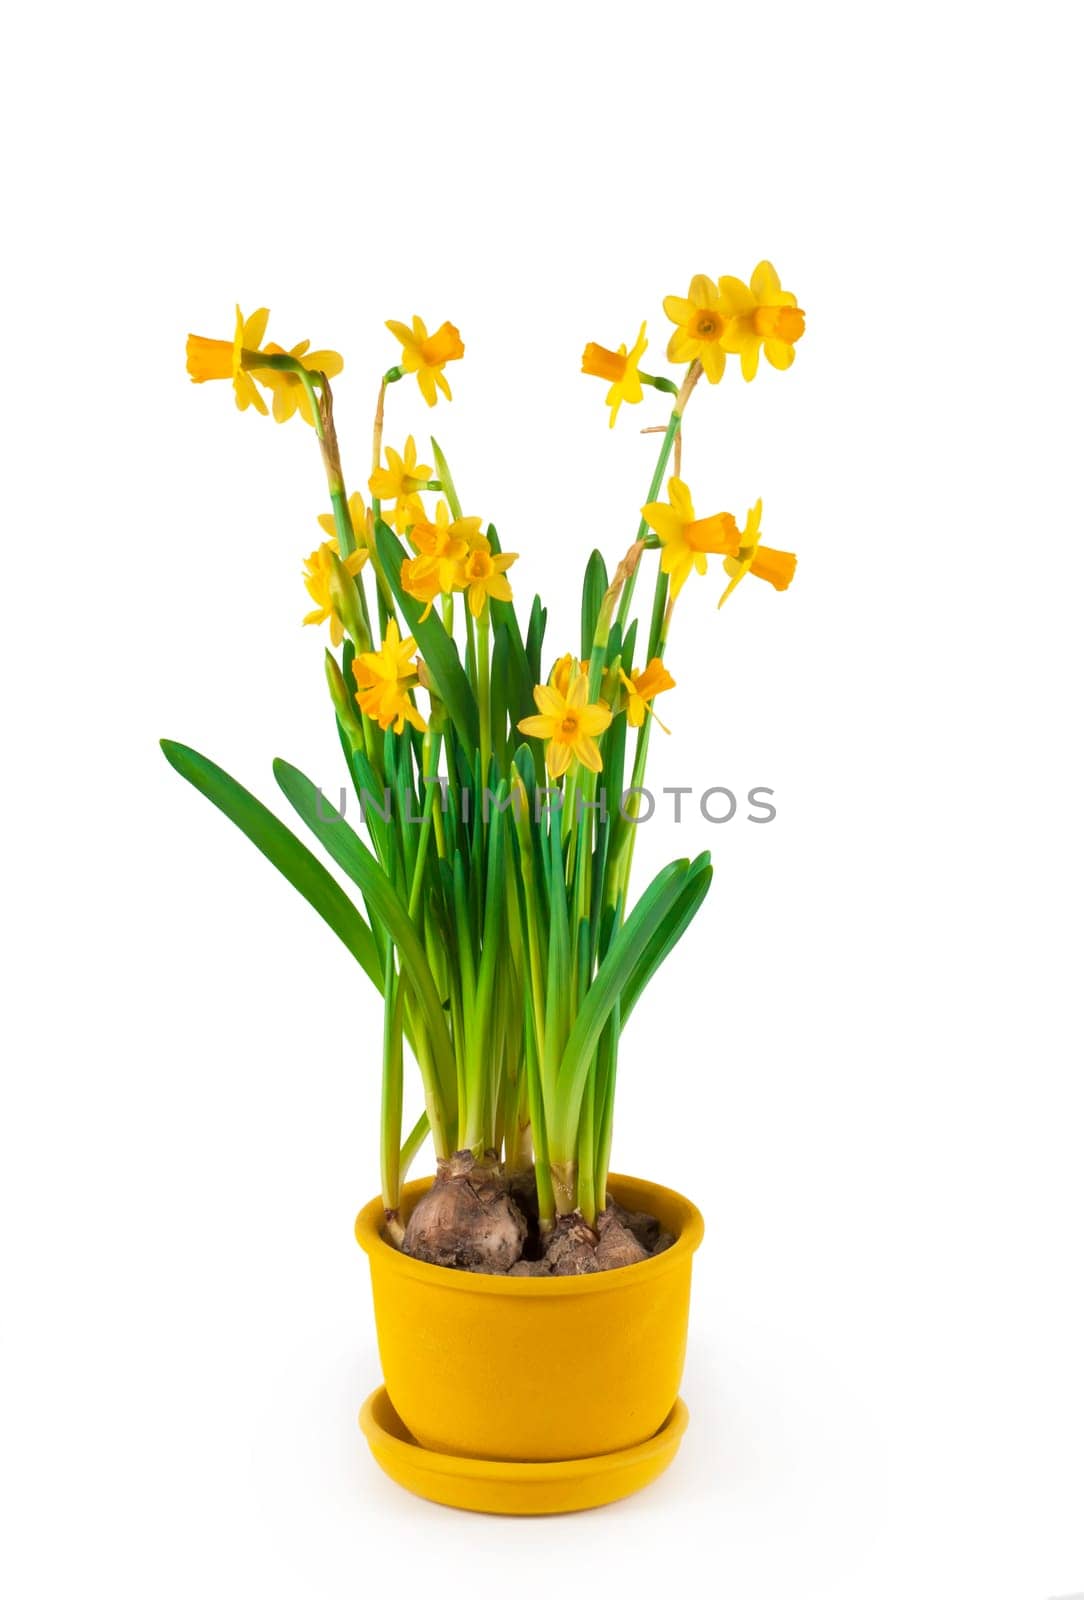 Potted blooming yellow daffodil spring flowers isolated on white background by aprilphoto